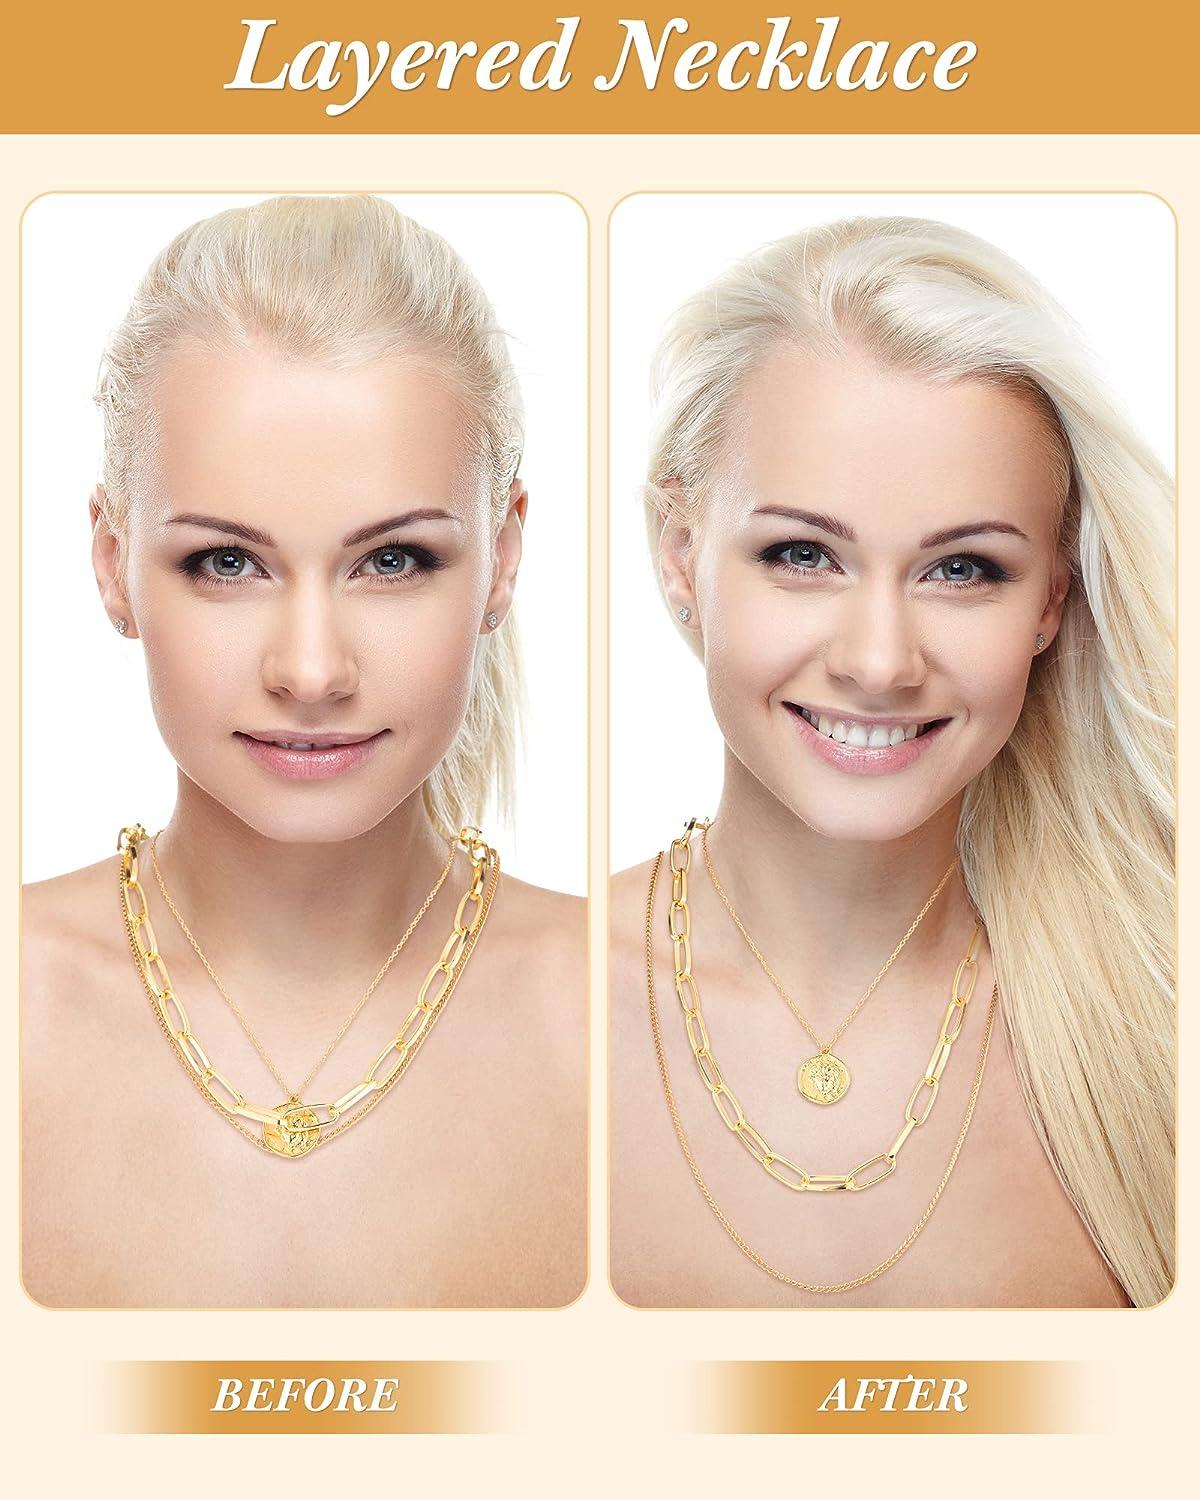 Chain Extender, 18K Gold Plated / Necklace| Nominal